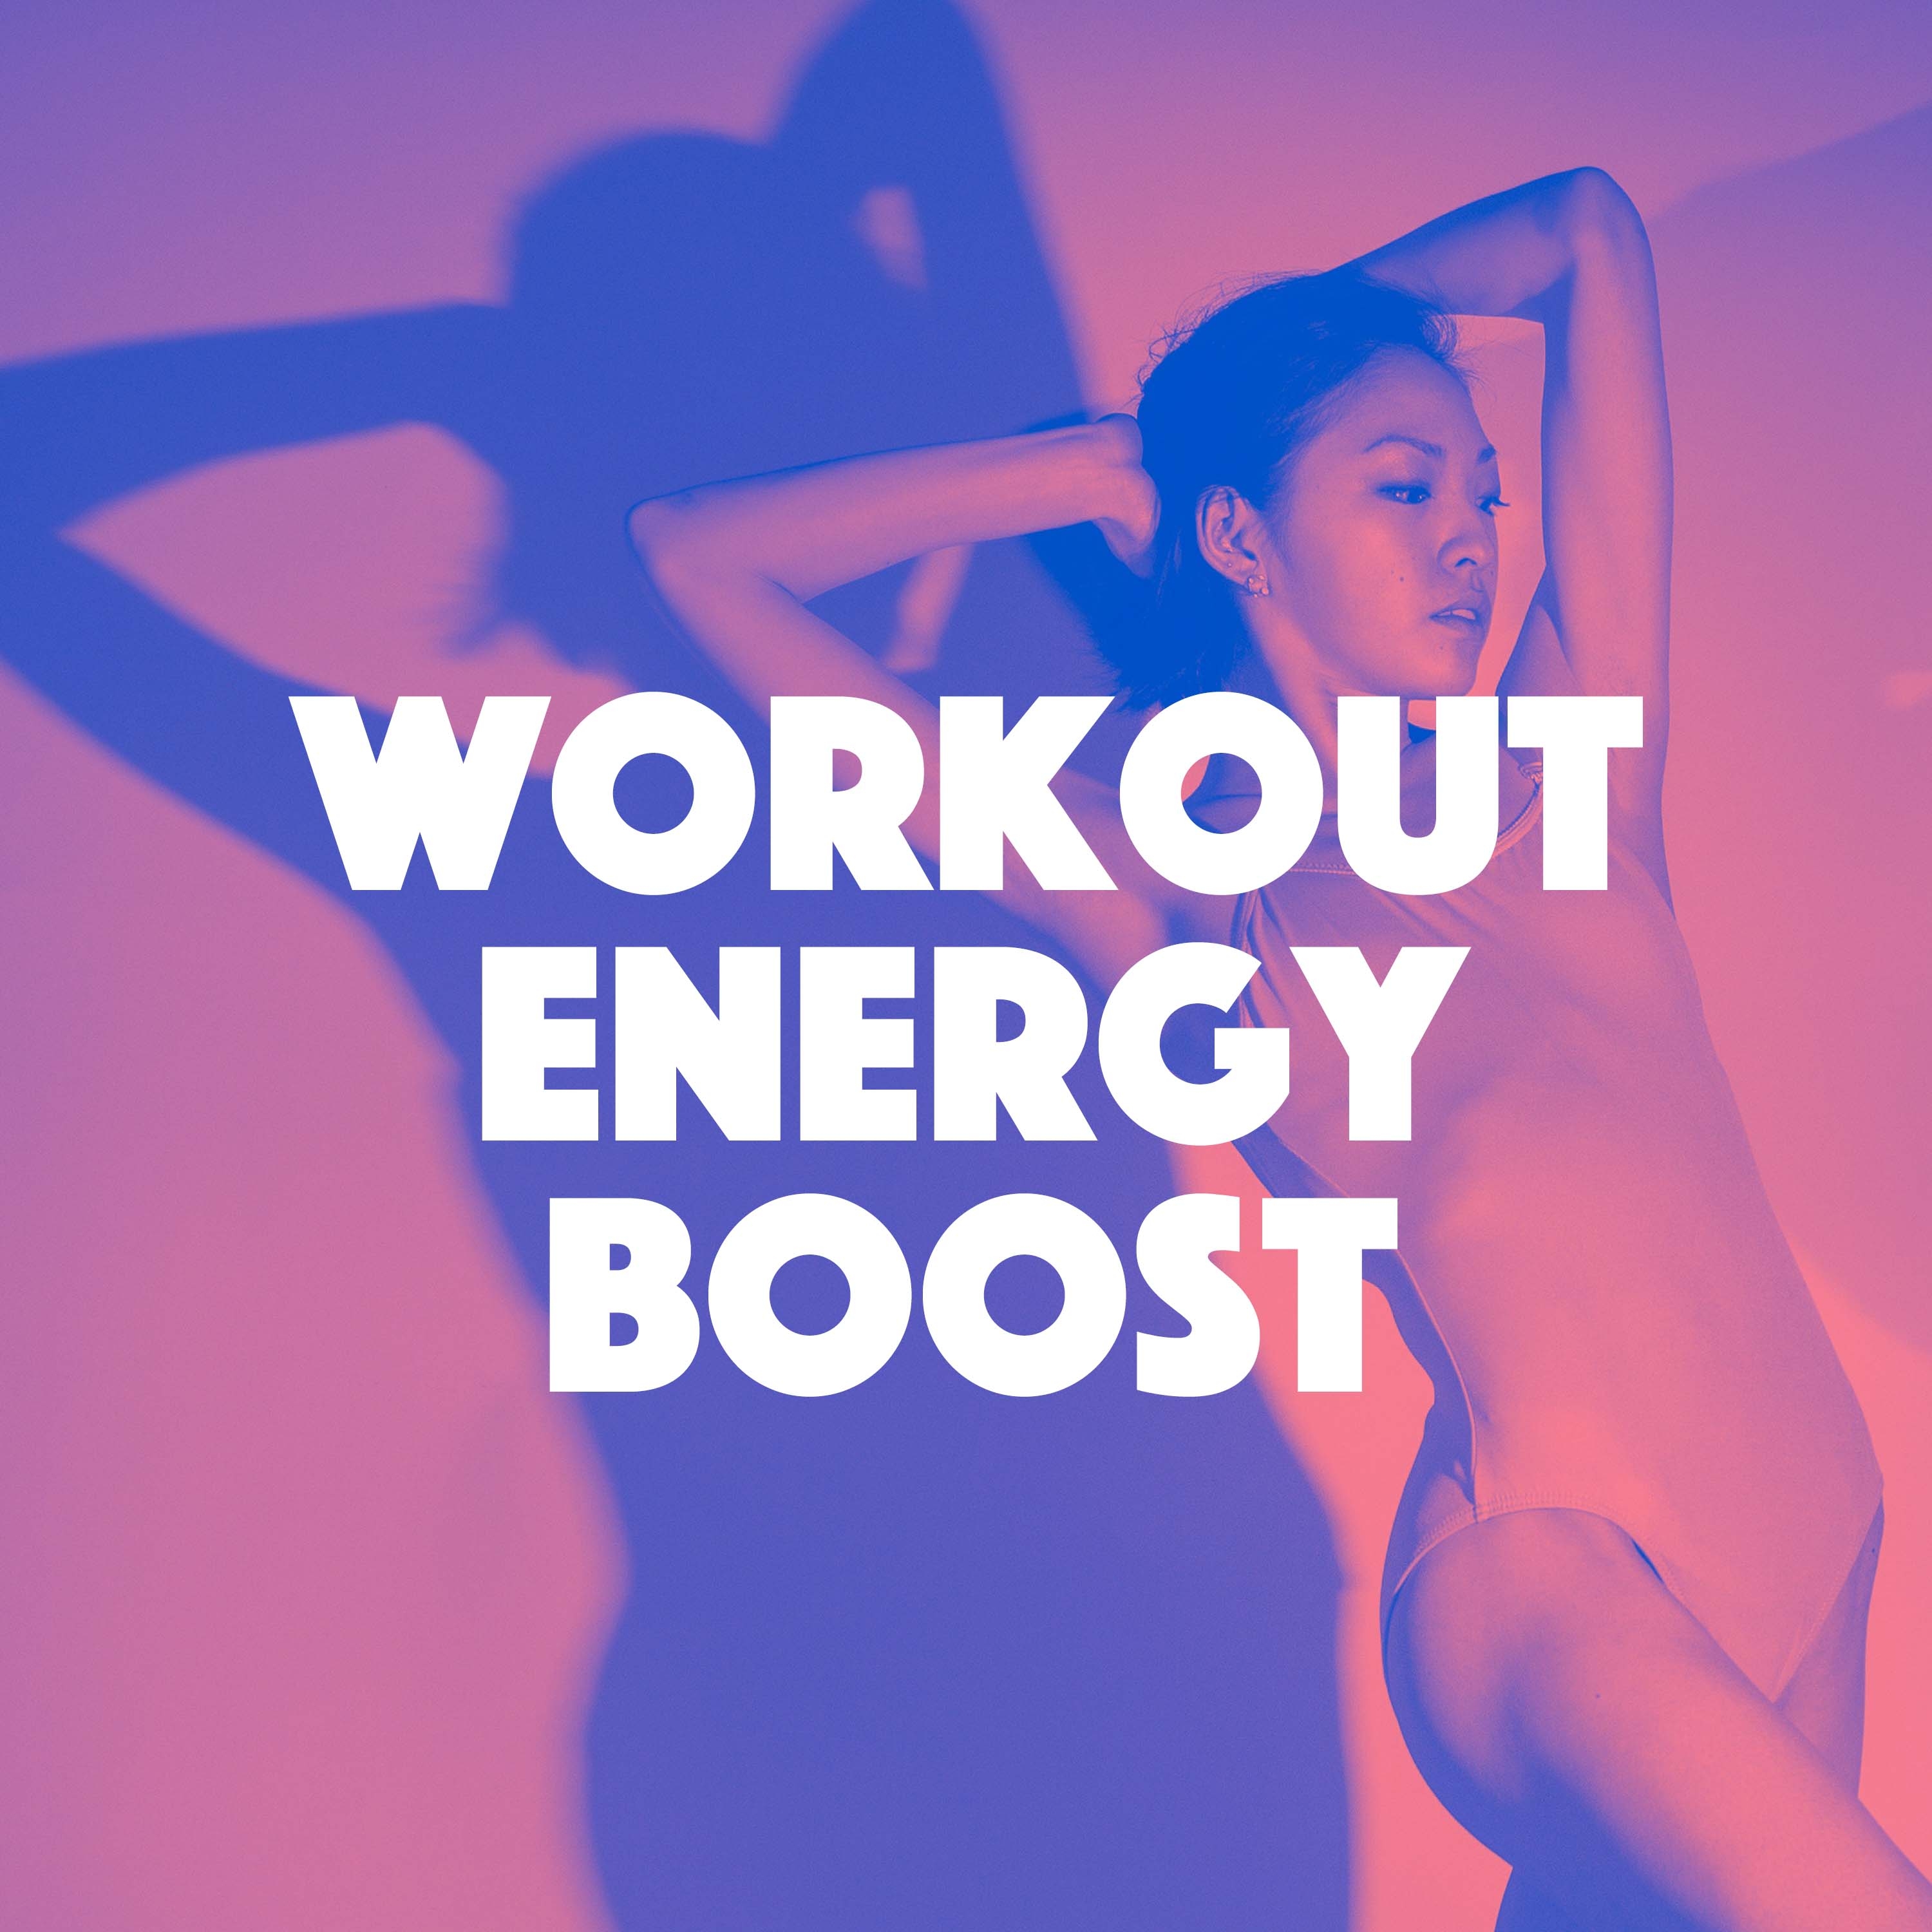 Workout Energy Boost 2018 - Best Workout Instrumental Music for Mad Training, Fitness and Gym